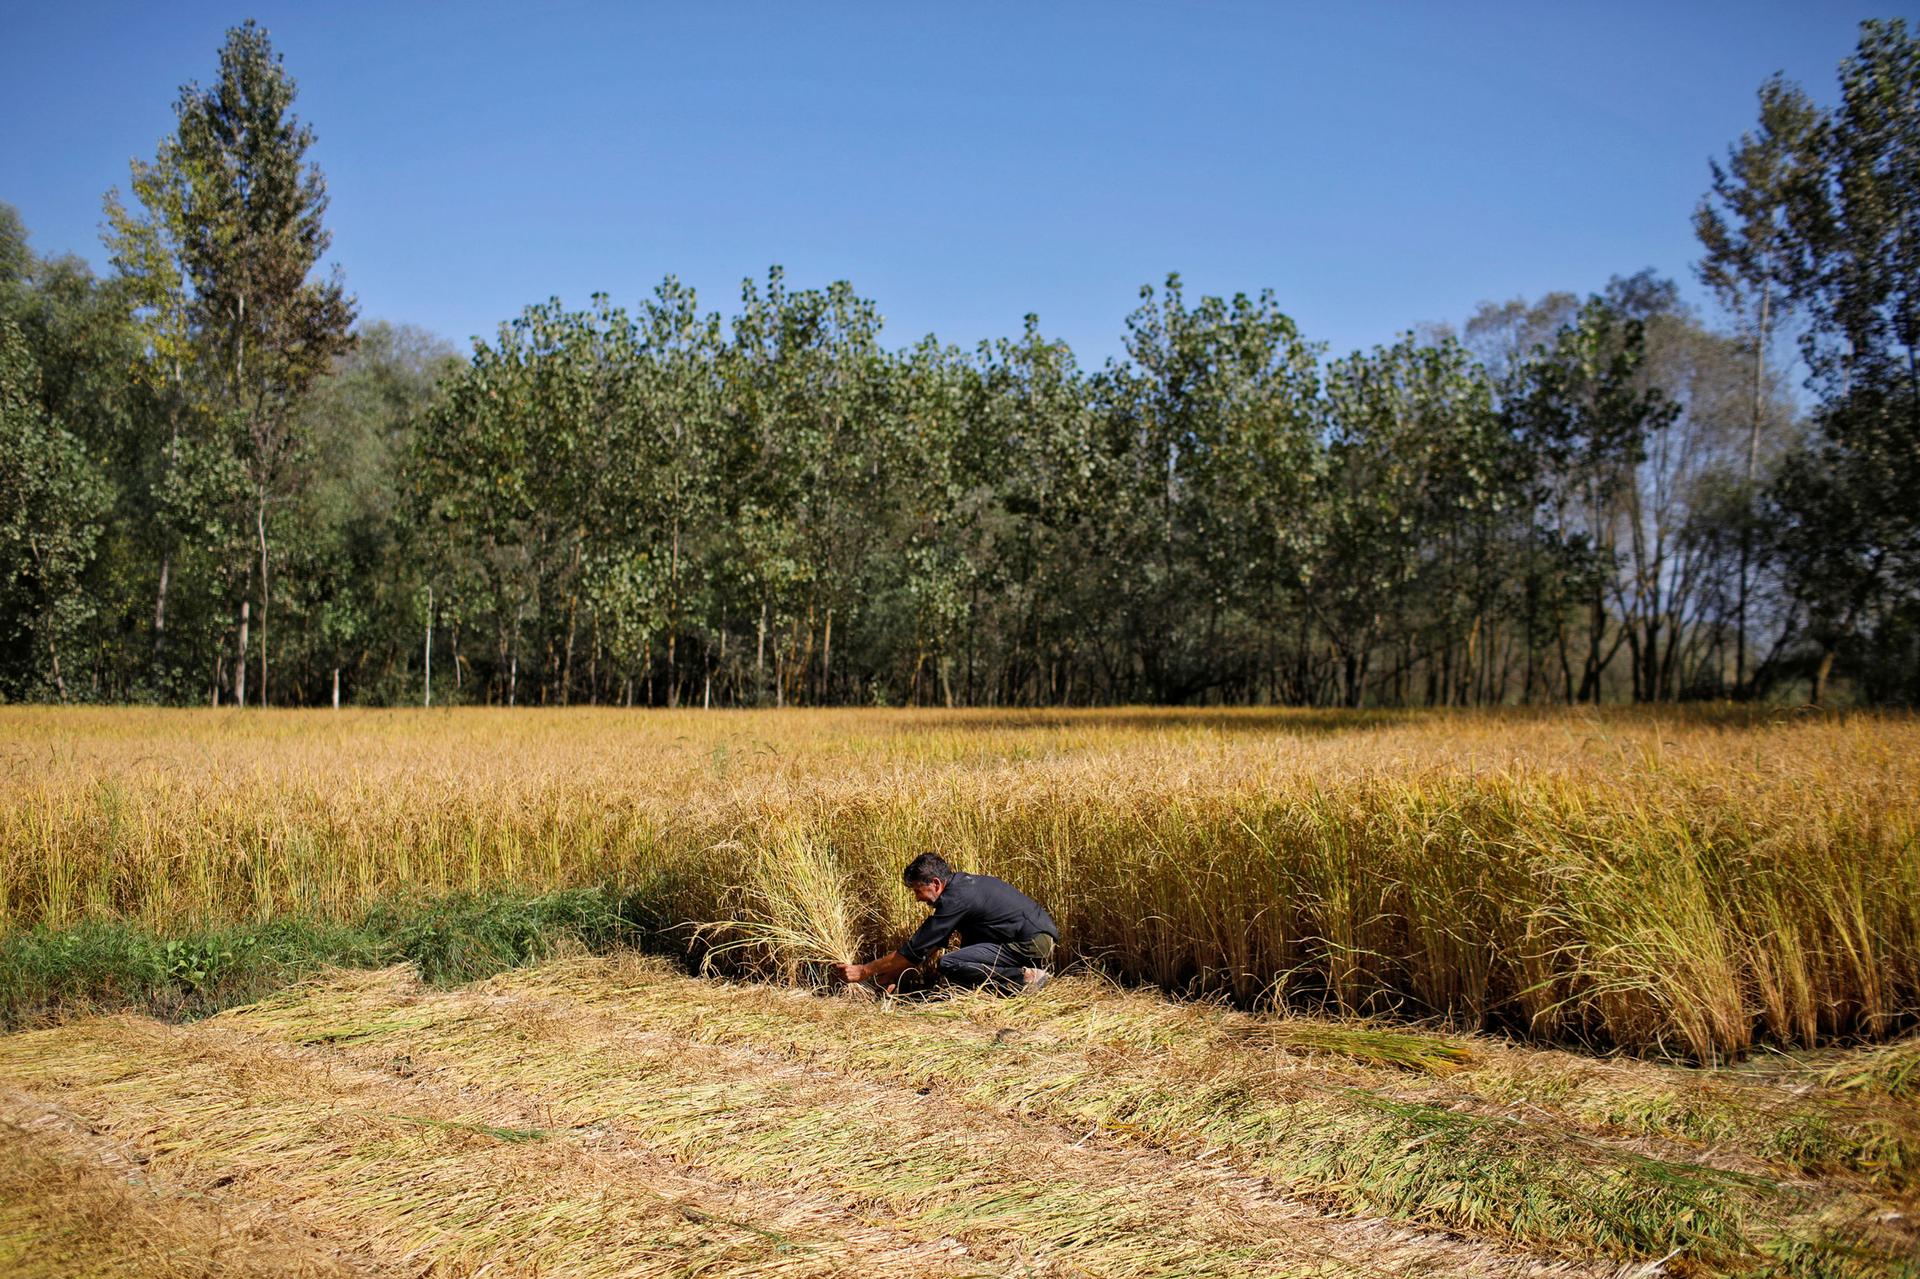 A man is shown kneeling next to a field of golden colored rice paddy.